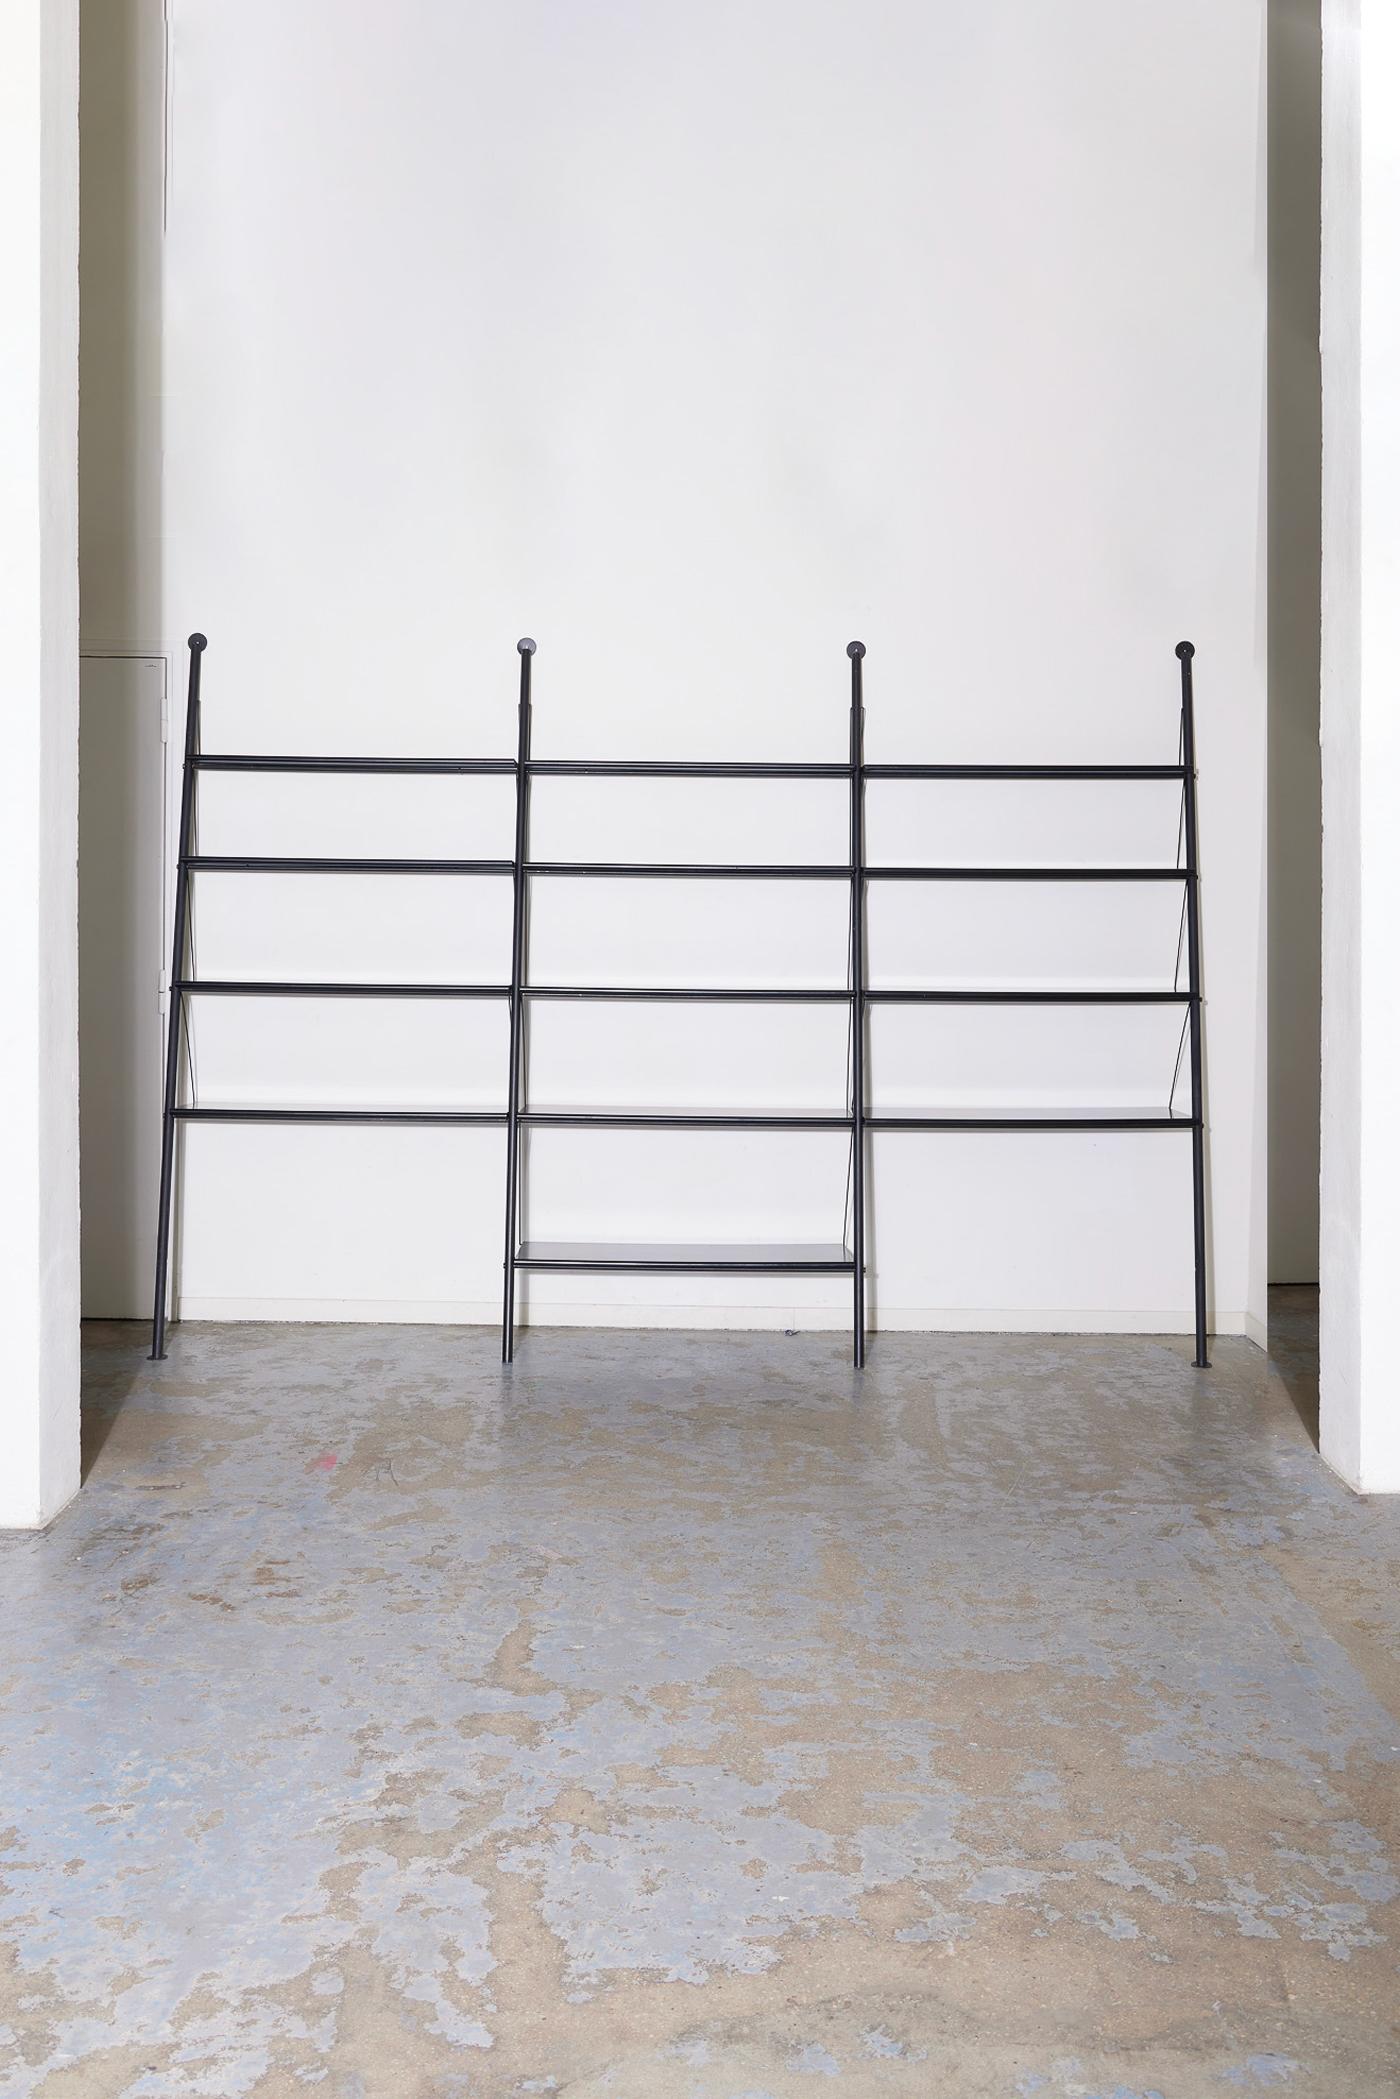 Shelf model 'John Ild' by designer Philippe Starck, published by Disform in the 1980s (1982). The structure consists of two black tubular metal uprights and metal shelves. This is the first bookshelf model designed by the designer. In perfect